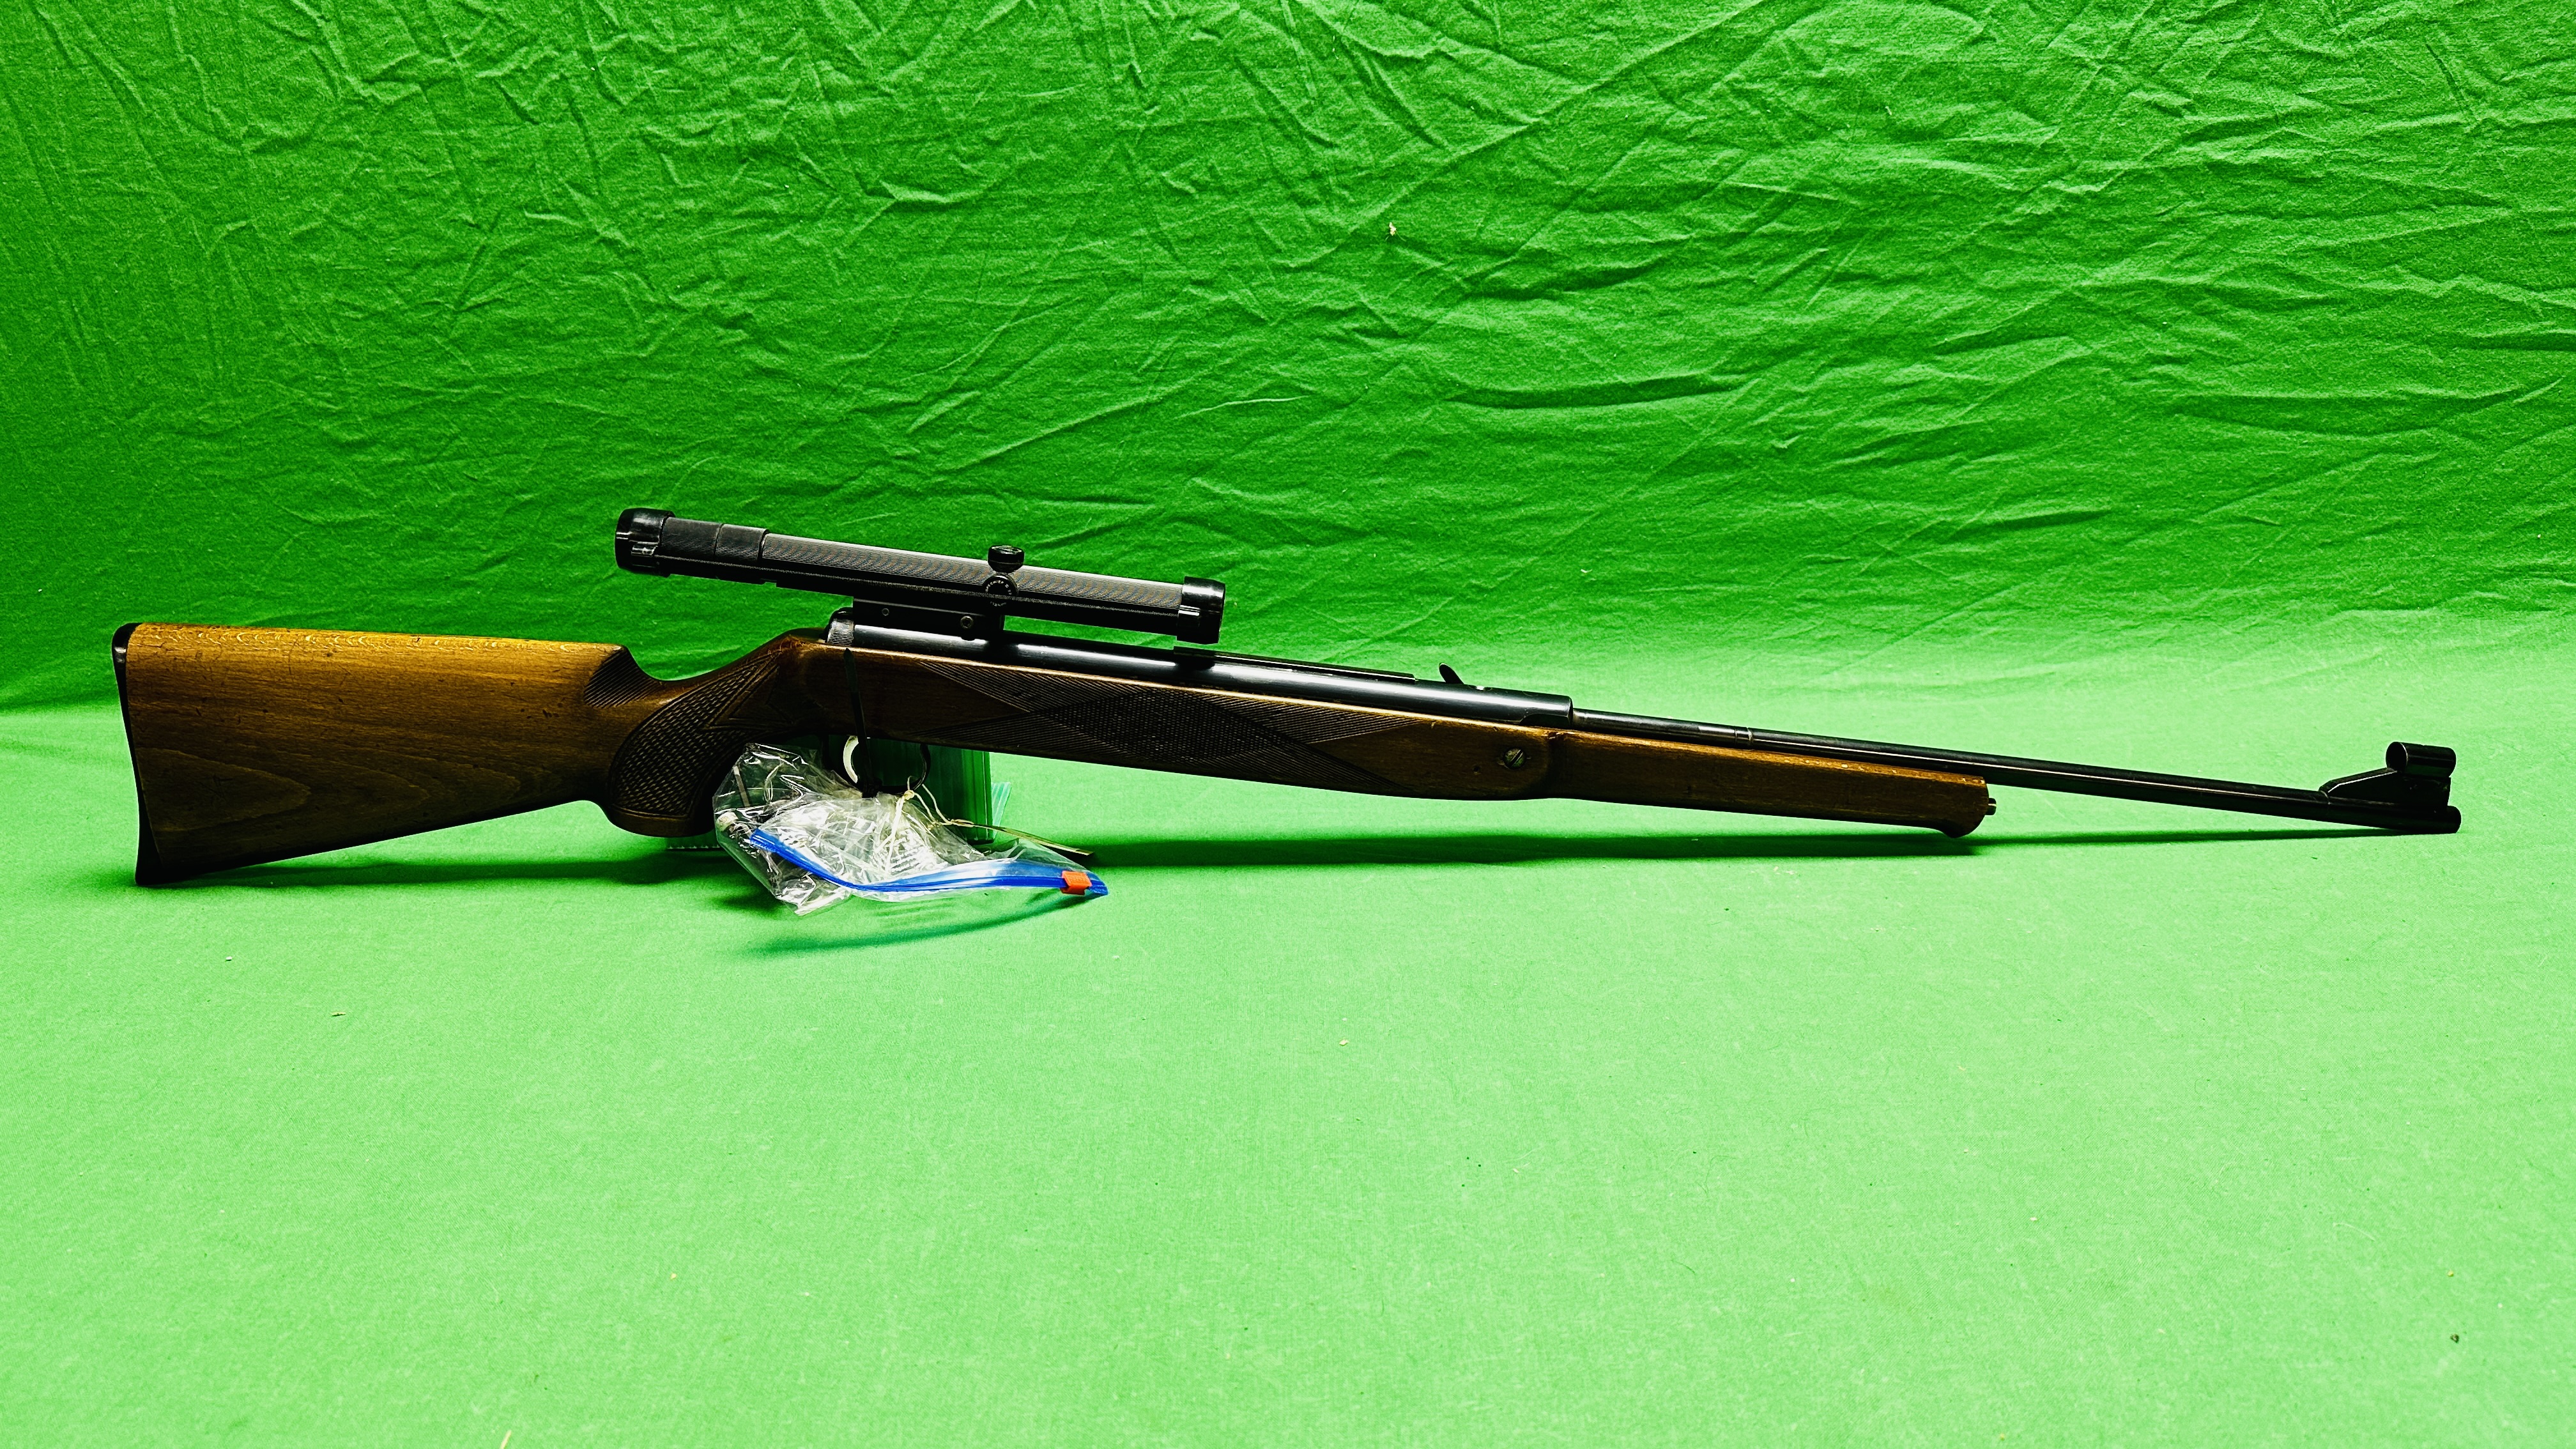 AN ORIGINAL MOD 50 UNDERLEVER AIR RIFLE FITTED WITH BUSHNELL 4 POWER SCOPE - (ALL GUNS TO BE